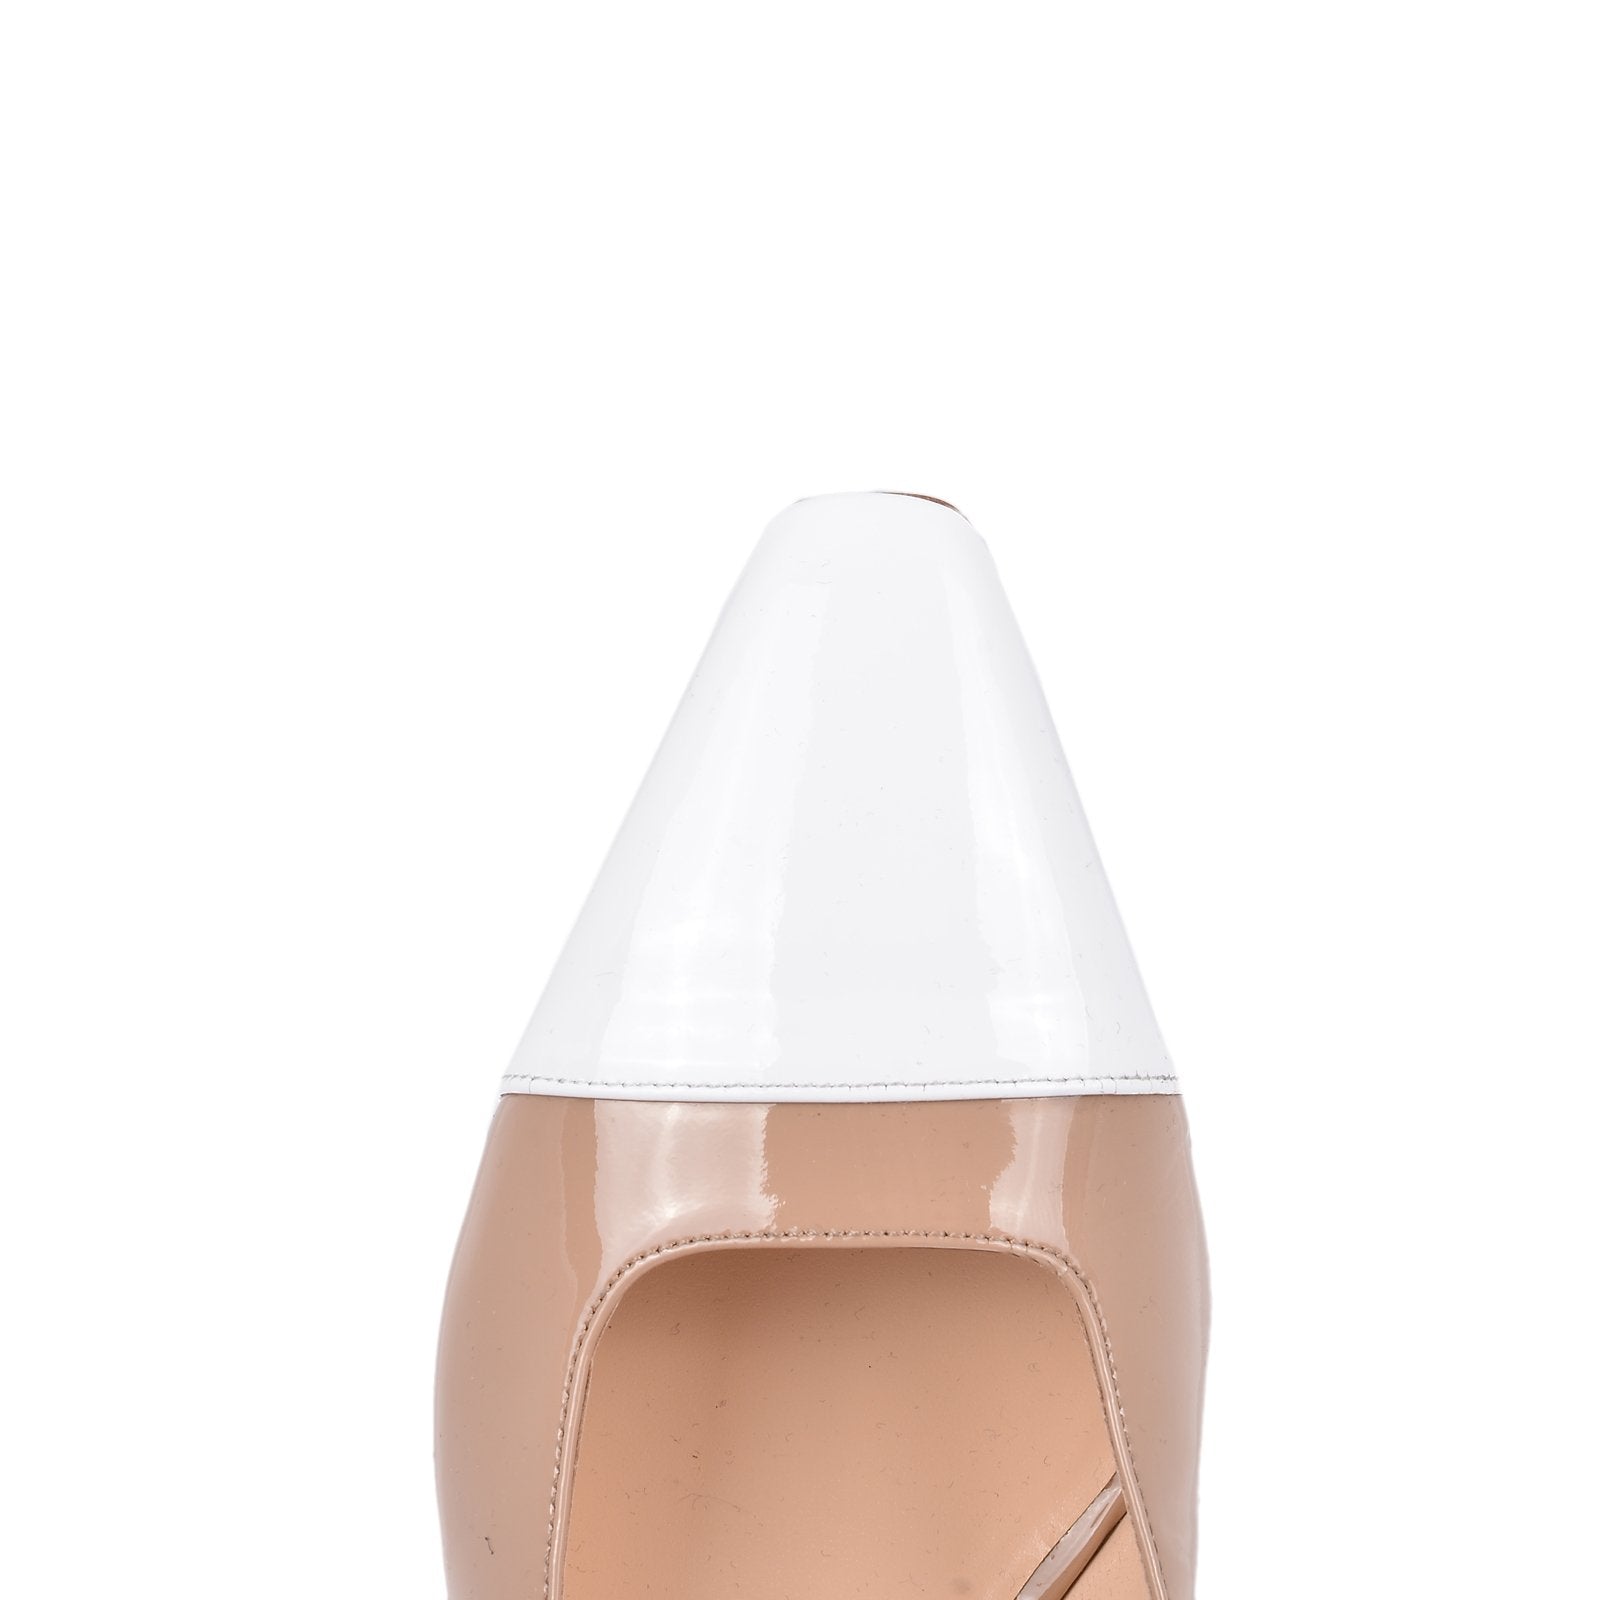 Ceppo Nude White Patent Mules Heels PATENT NUDE 2570 - 5